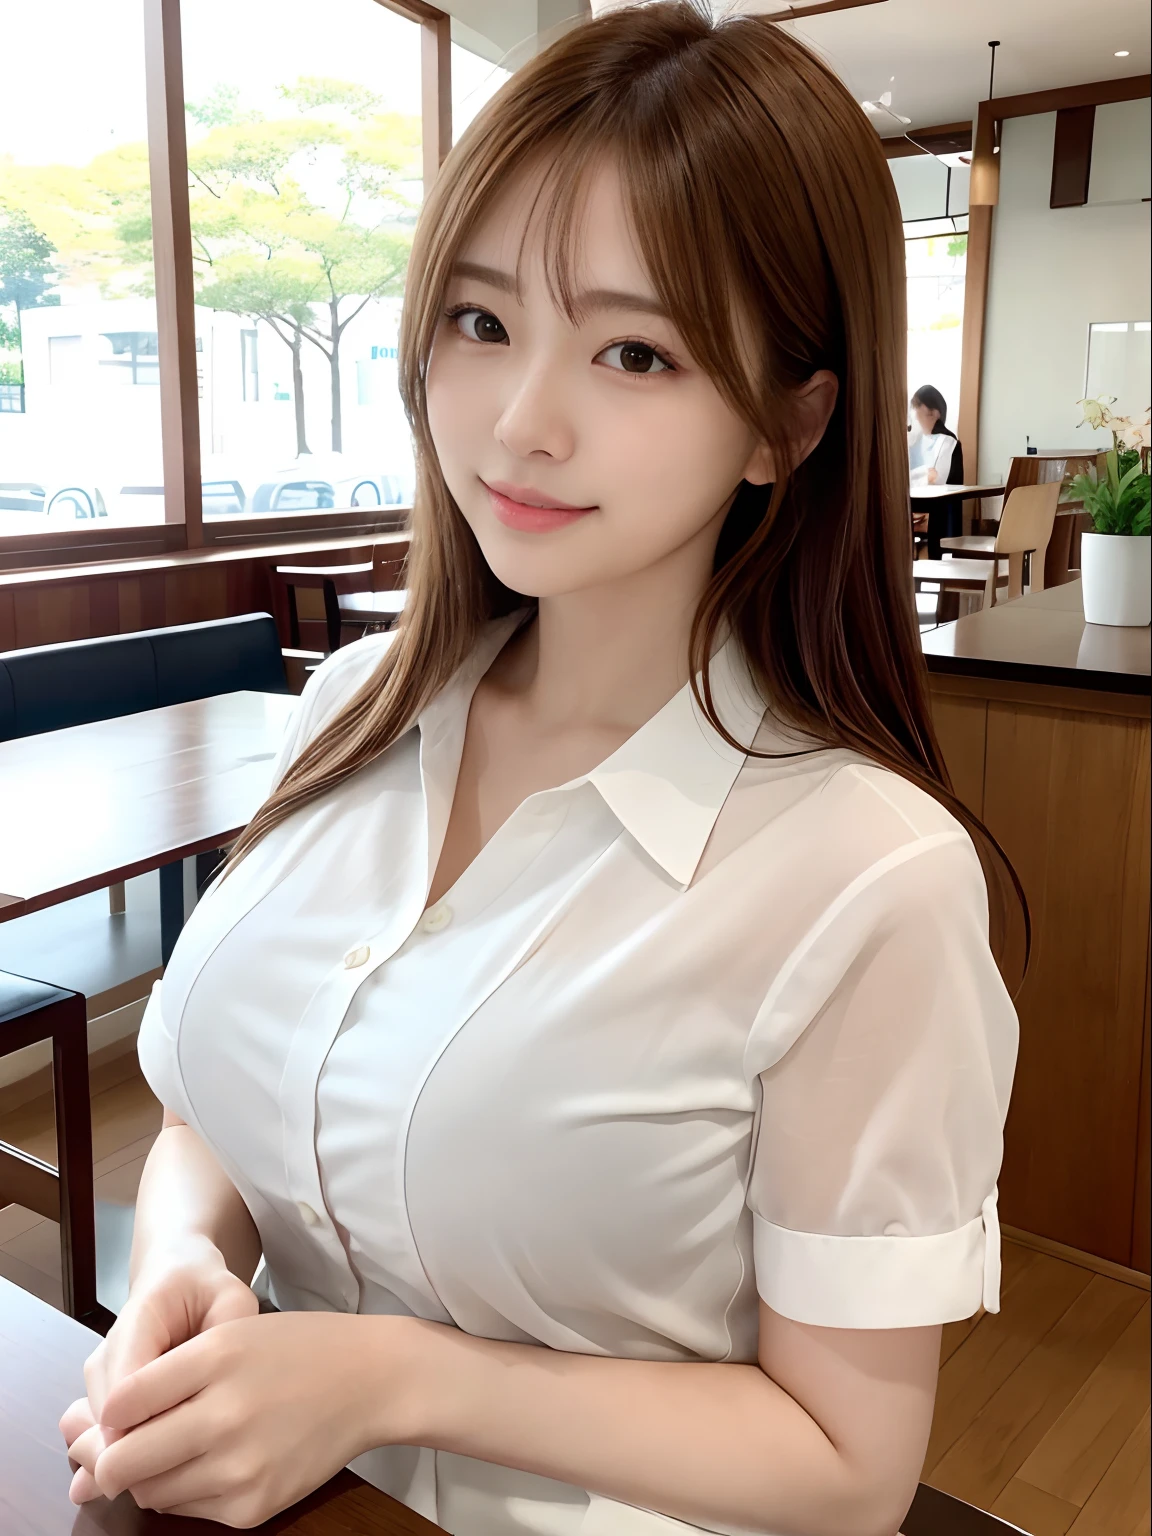 masutepiece、Supreme Beauty、Beautifully shaped breasts、​masterpiece, 1 girl, solo、Thin white shirt、detail, depth of fields, 135 mm, Textured skin, Super Detail, High quality, awardwinning, Best Quality, hight resolution, 8K, white-skinned,Koi brown hair、Random hair、cute  face、Gentle smile、Adult beauties、25-years old、1 person per Japan、Top image quality、Ultra-high resolution、8K、Bright sunshine、Delicate Photos、Unwind in a café、Realistic background